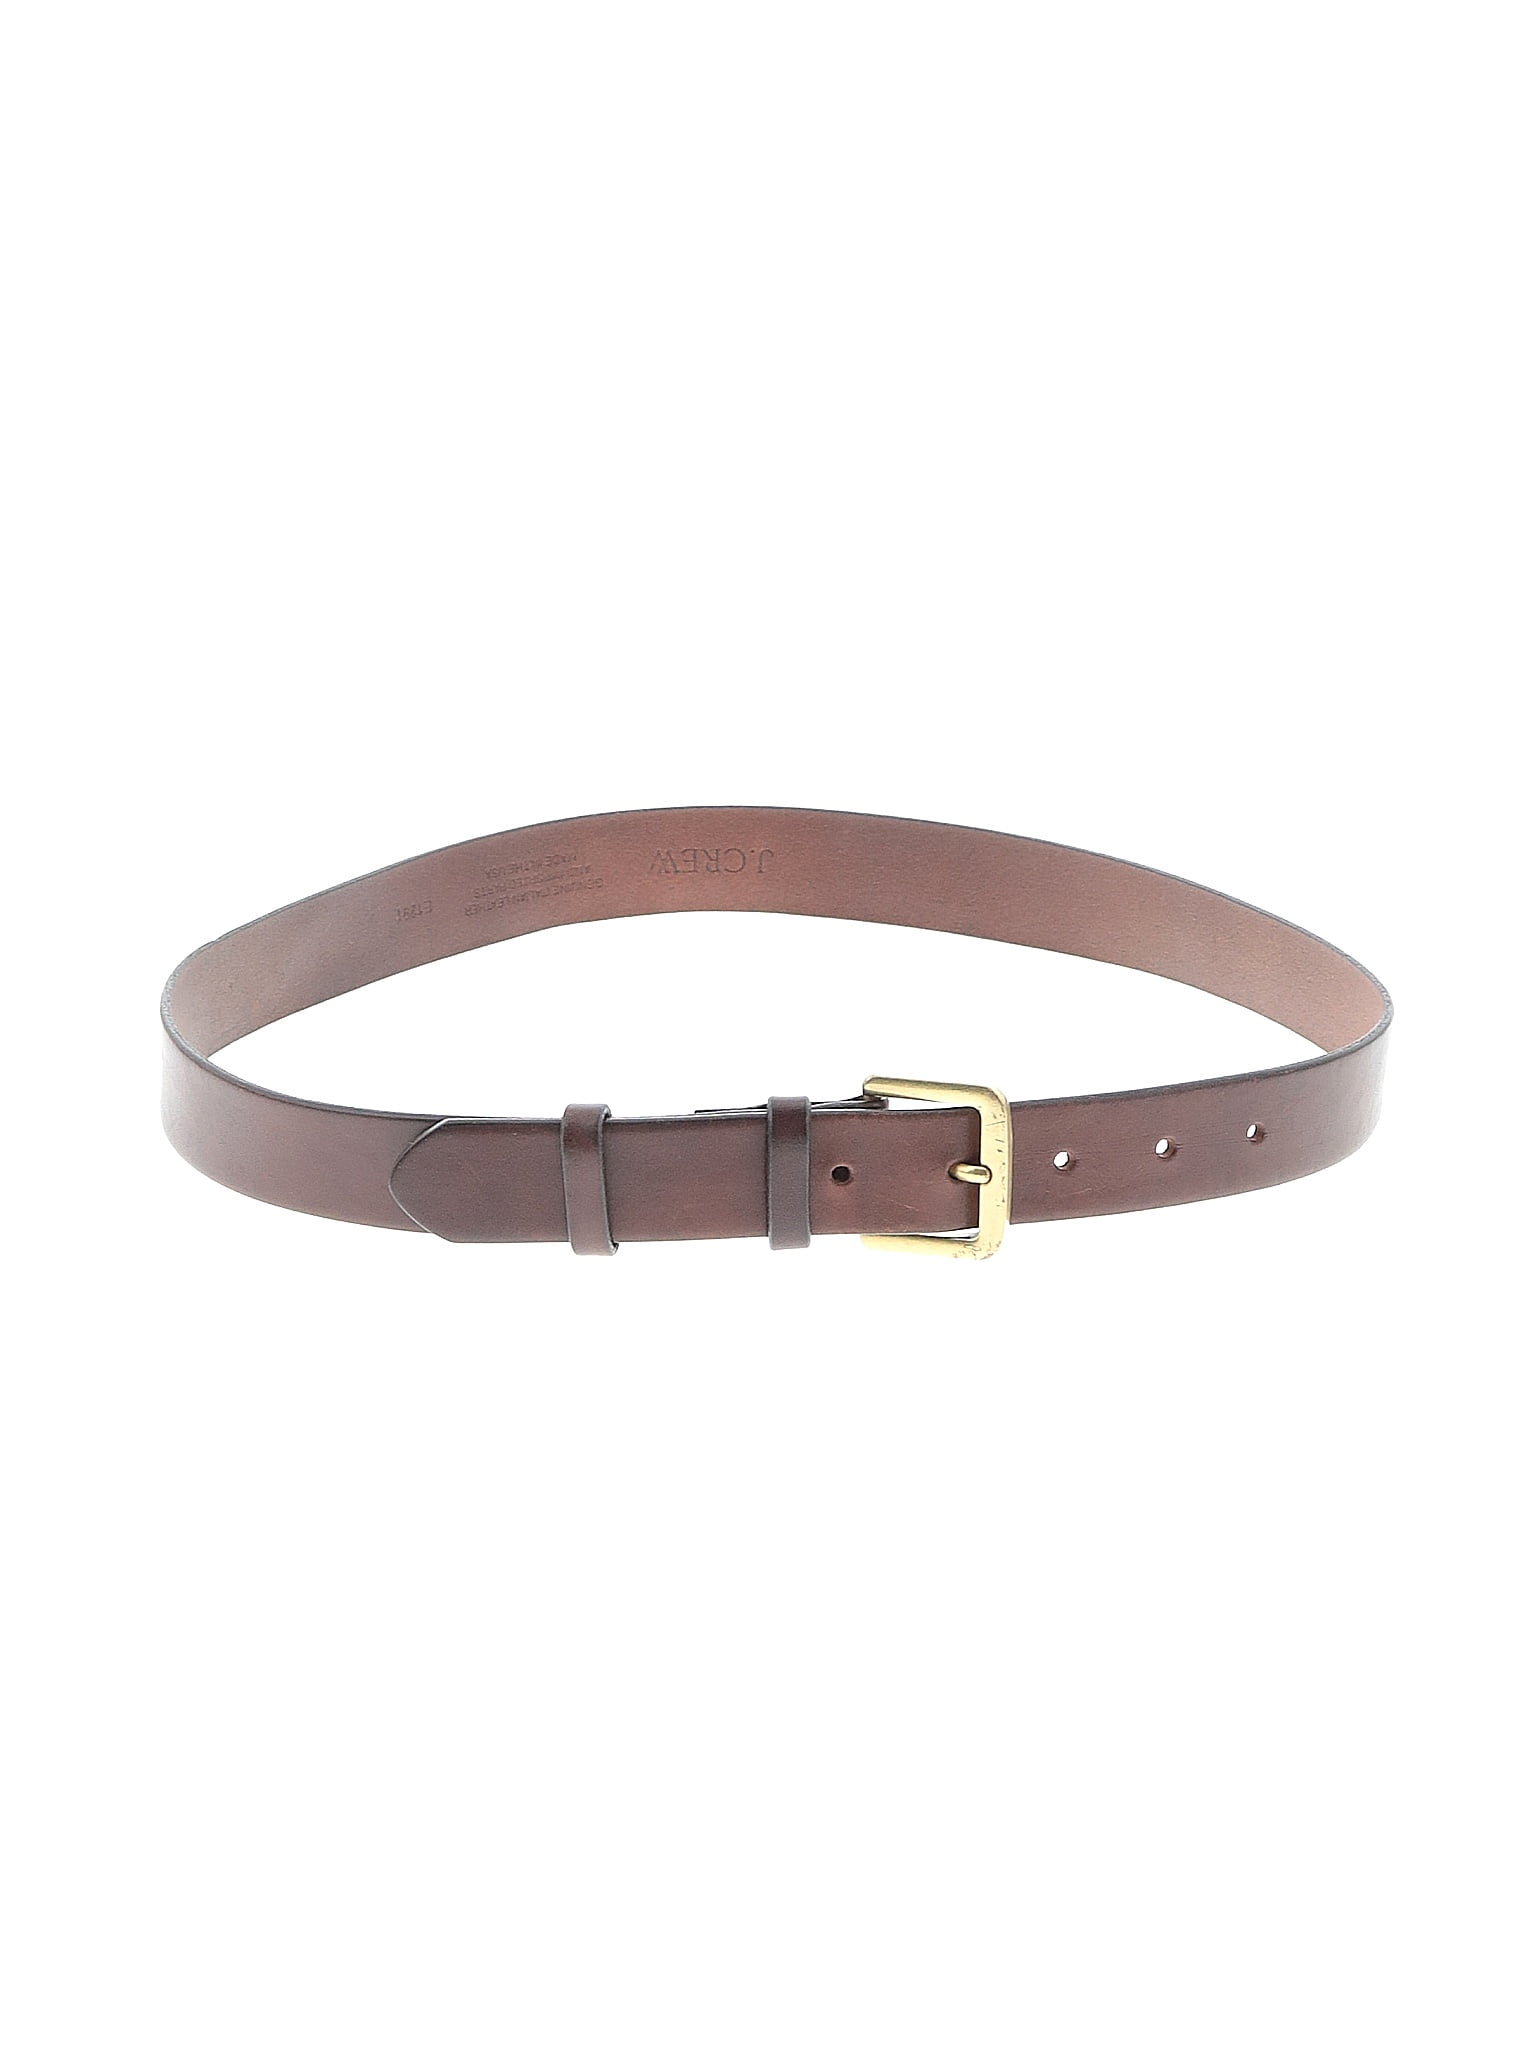 J.Crew 100% Leather Brown Leather Belt Size XS - 63% off | thredUP